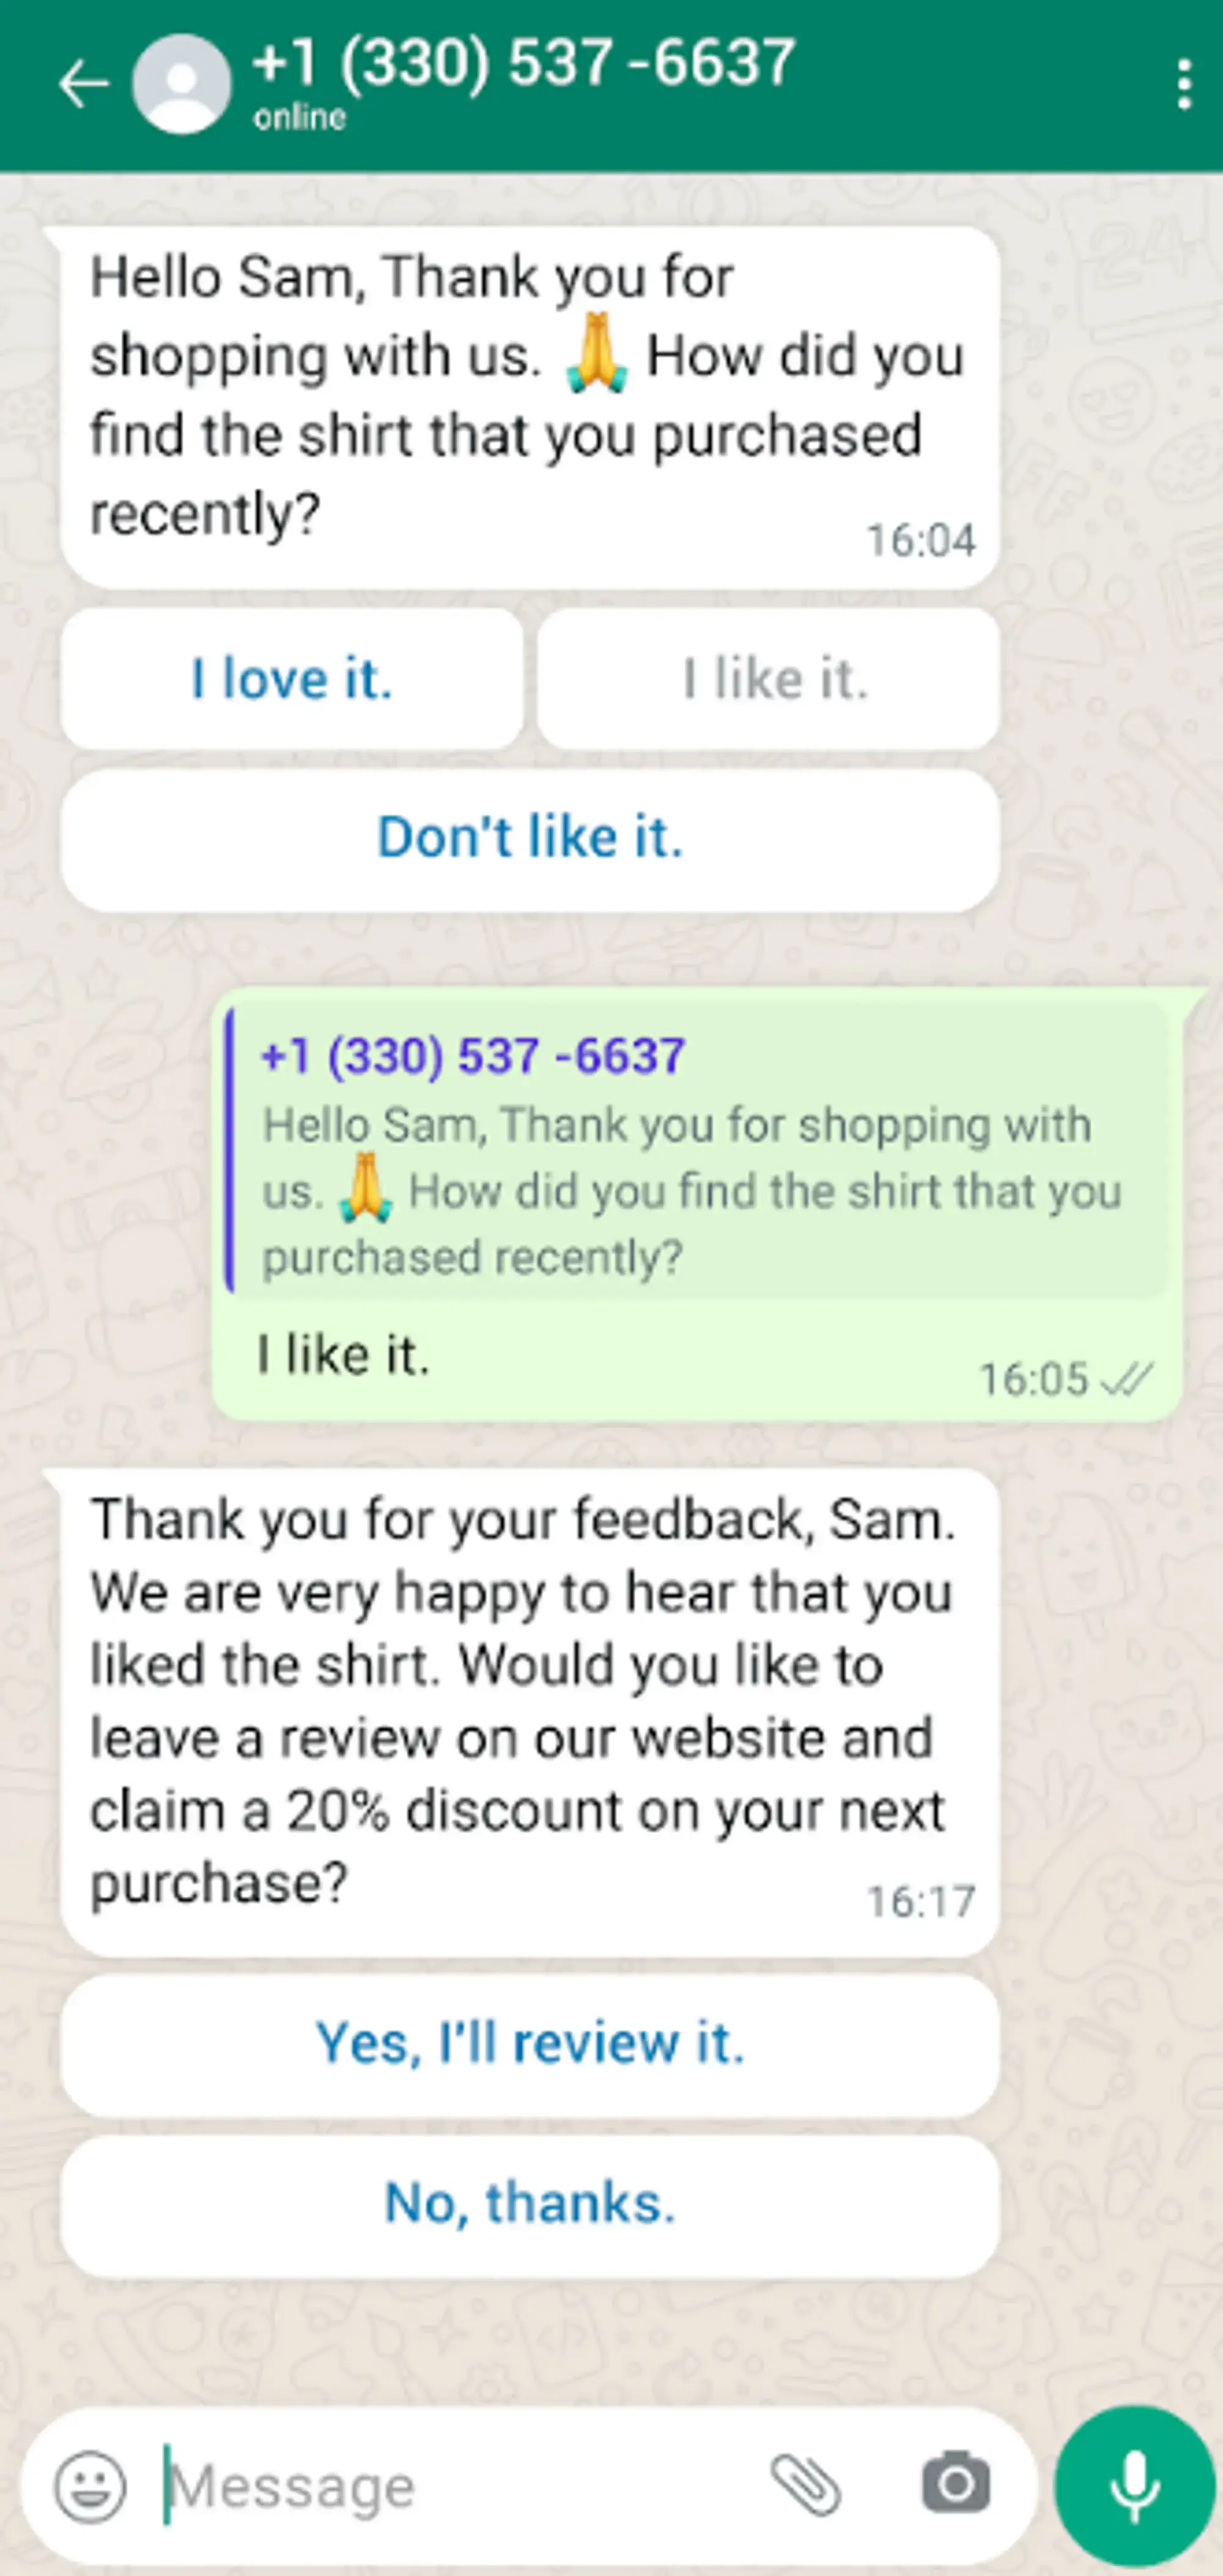 Interactive WhatsApp message asking a customer for a feedback.